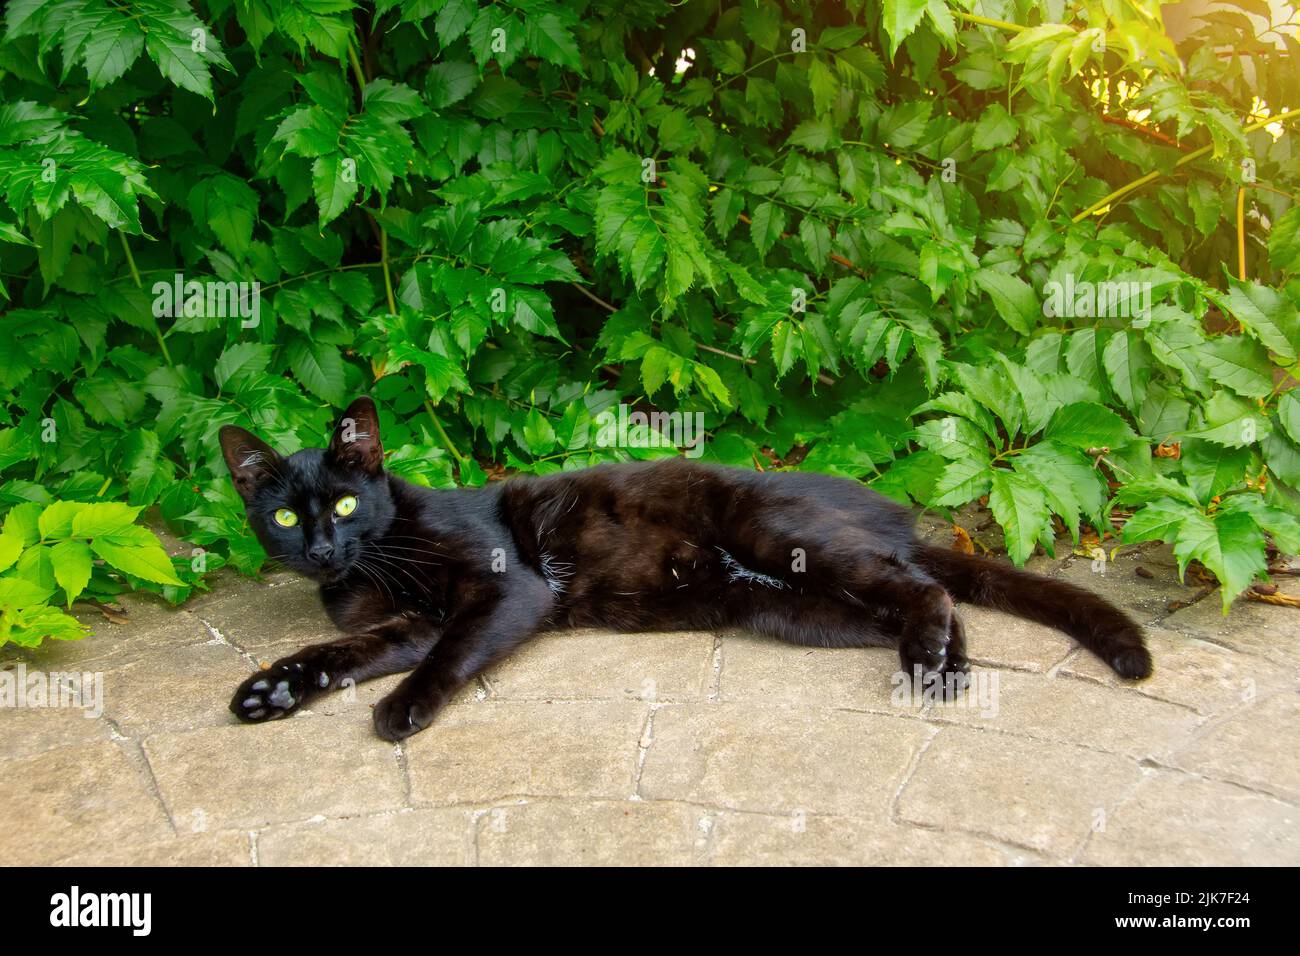 Black cat lies resting on a path in the yard against the background of green leaves of bushes Stock Photo